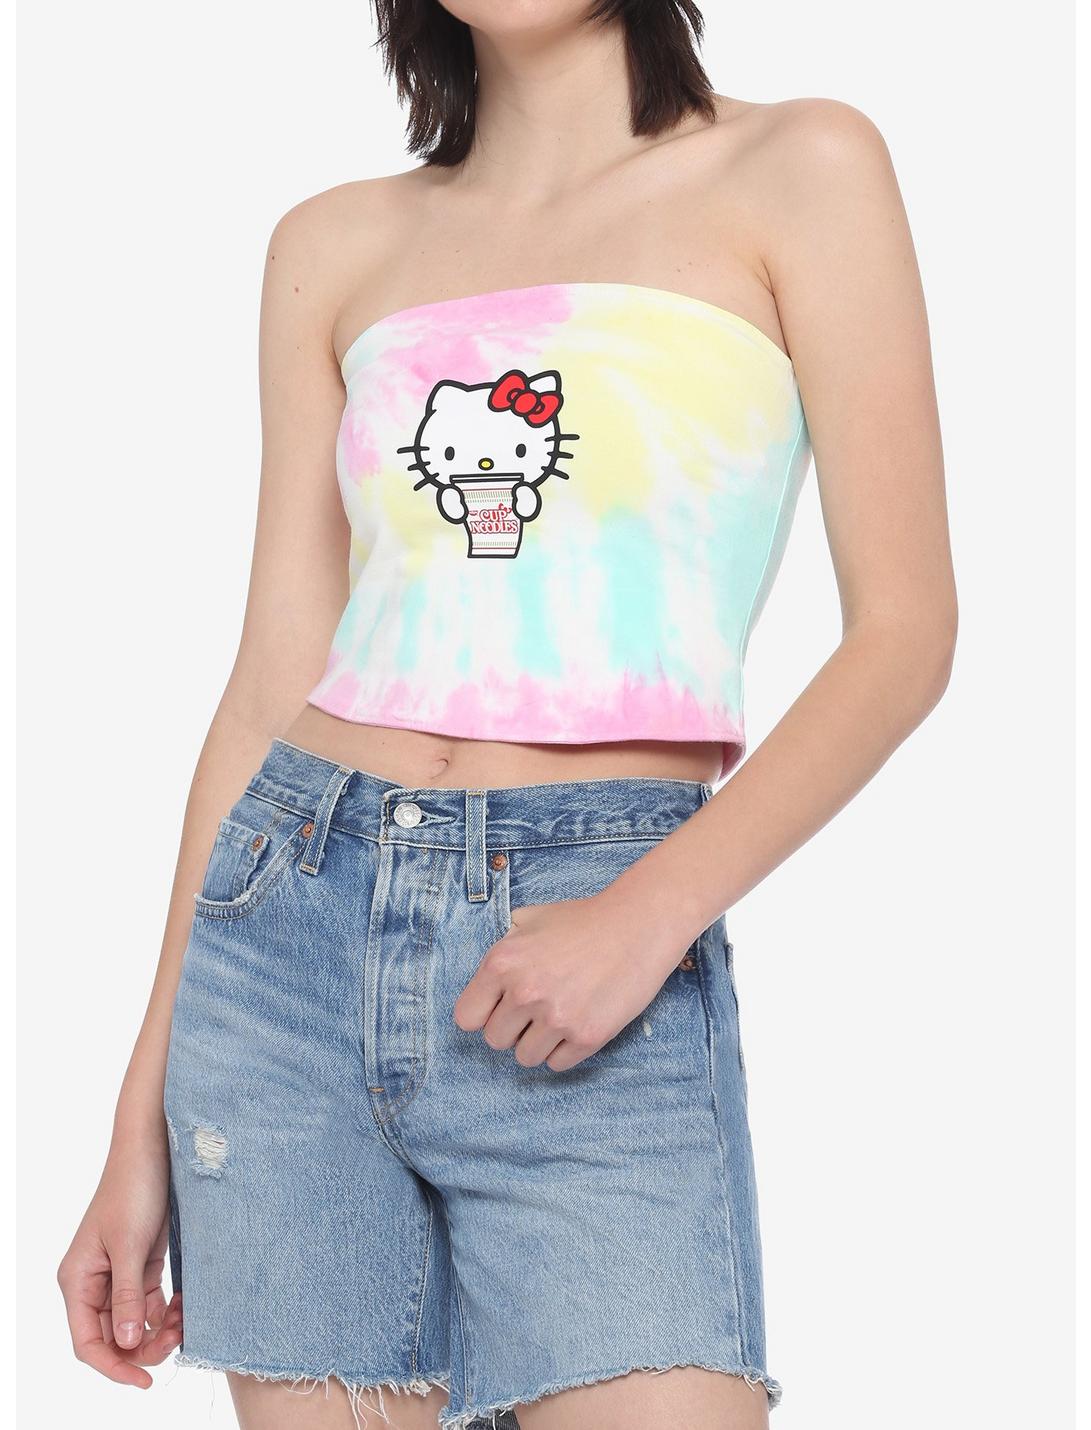 Nissin Cup Noodles X Hello Kitty Rainbow Tie-Dye Girls Tube Top, MULTI, hi-res